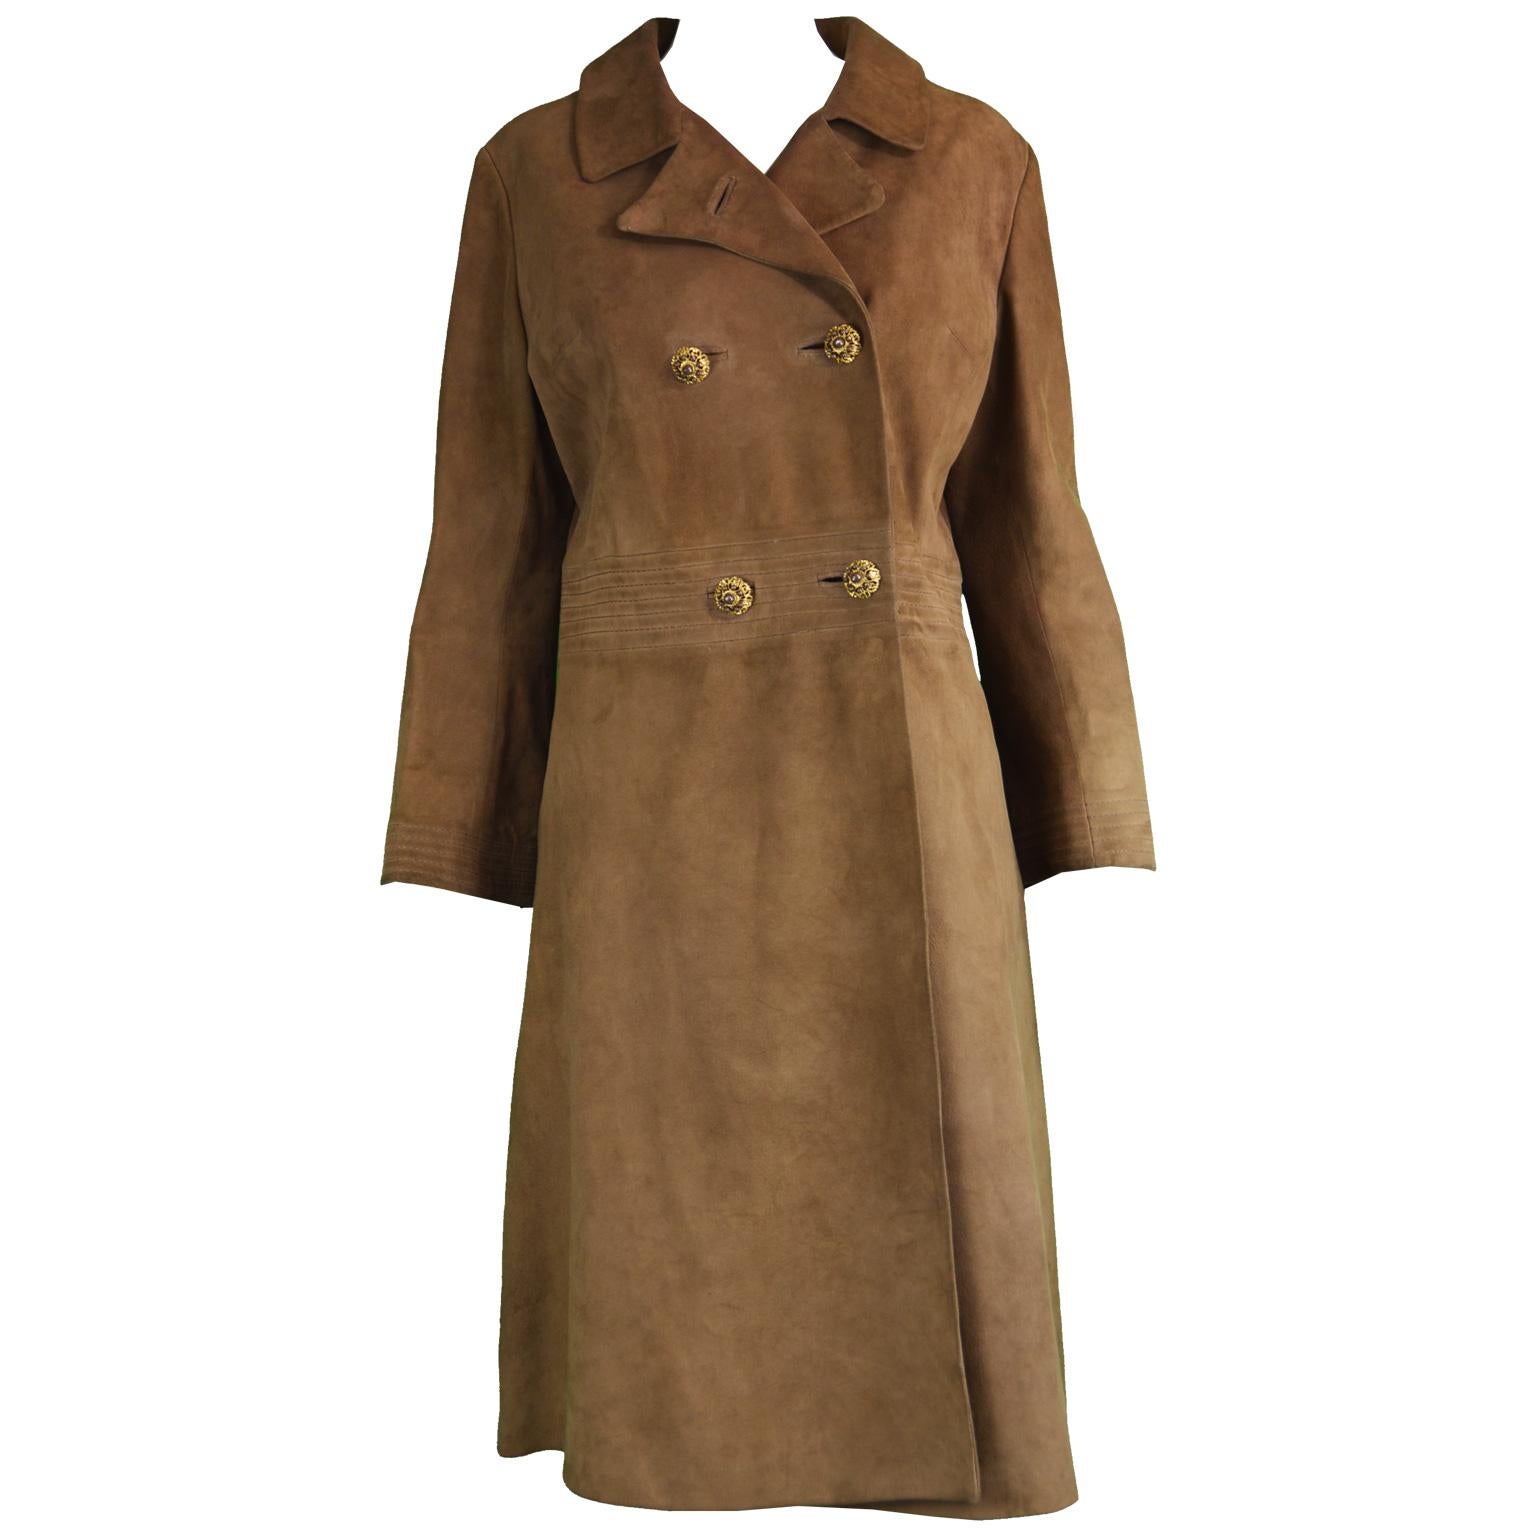 Loewe Rare Vintage 1960s Brown Suede Leather Double Breasted Coat